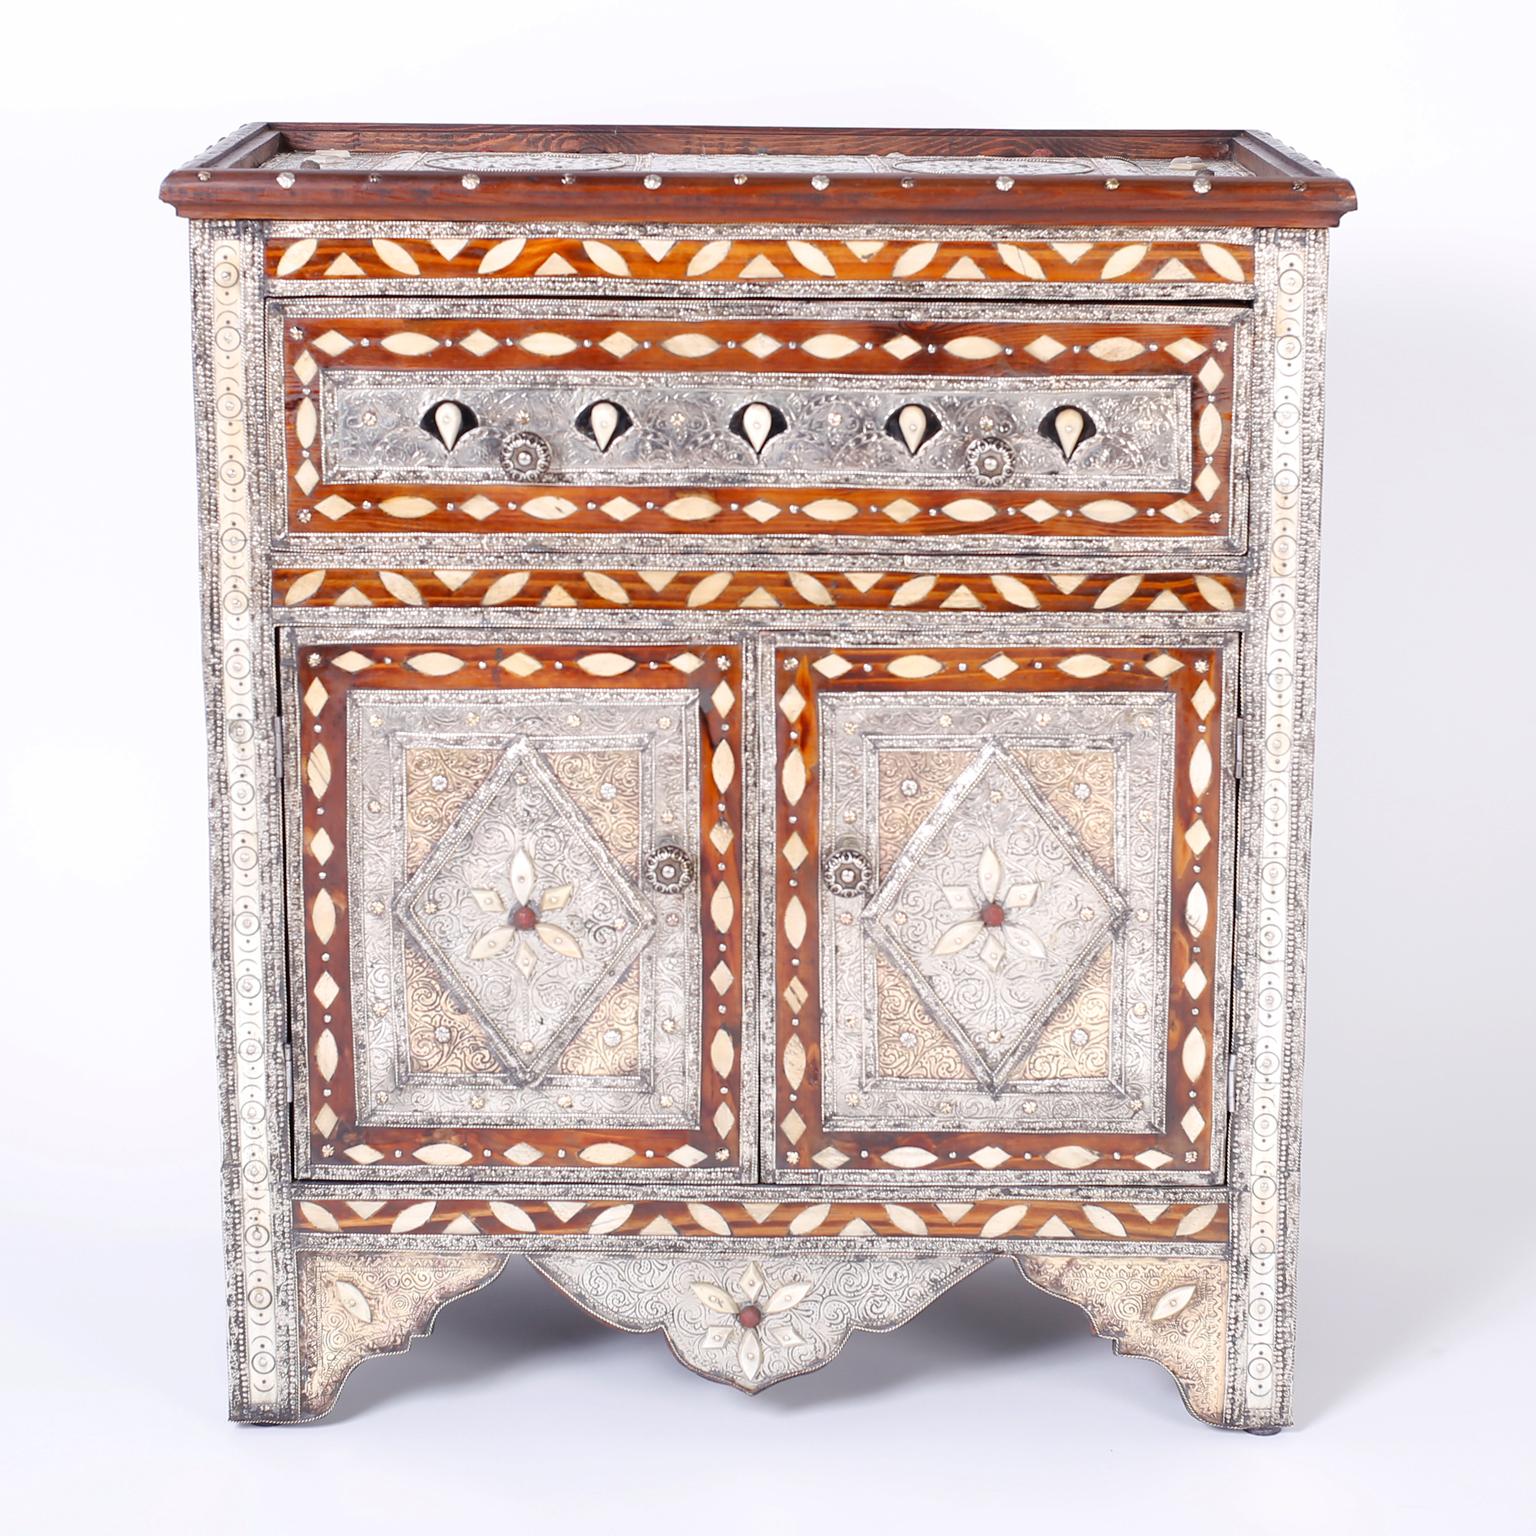 Unique Turkish cabinet or stand showing Syrian influences with elaborate hand hammered floral designs on tin over a hardwood frame. Featuring semi-precious stones, bone inlays, stick and ball panels and plenty of storage with a drawer and two